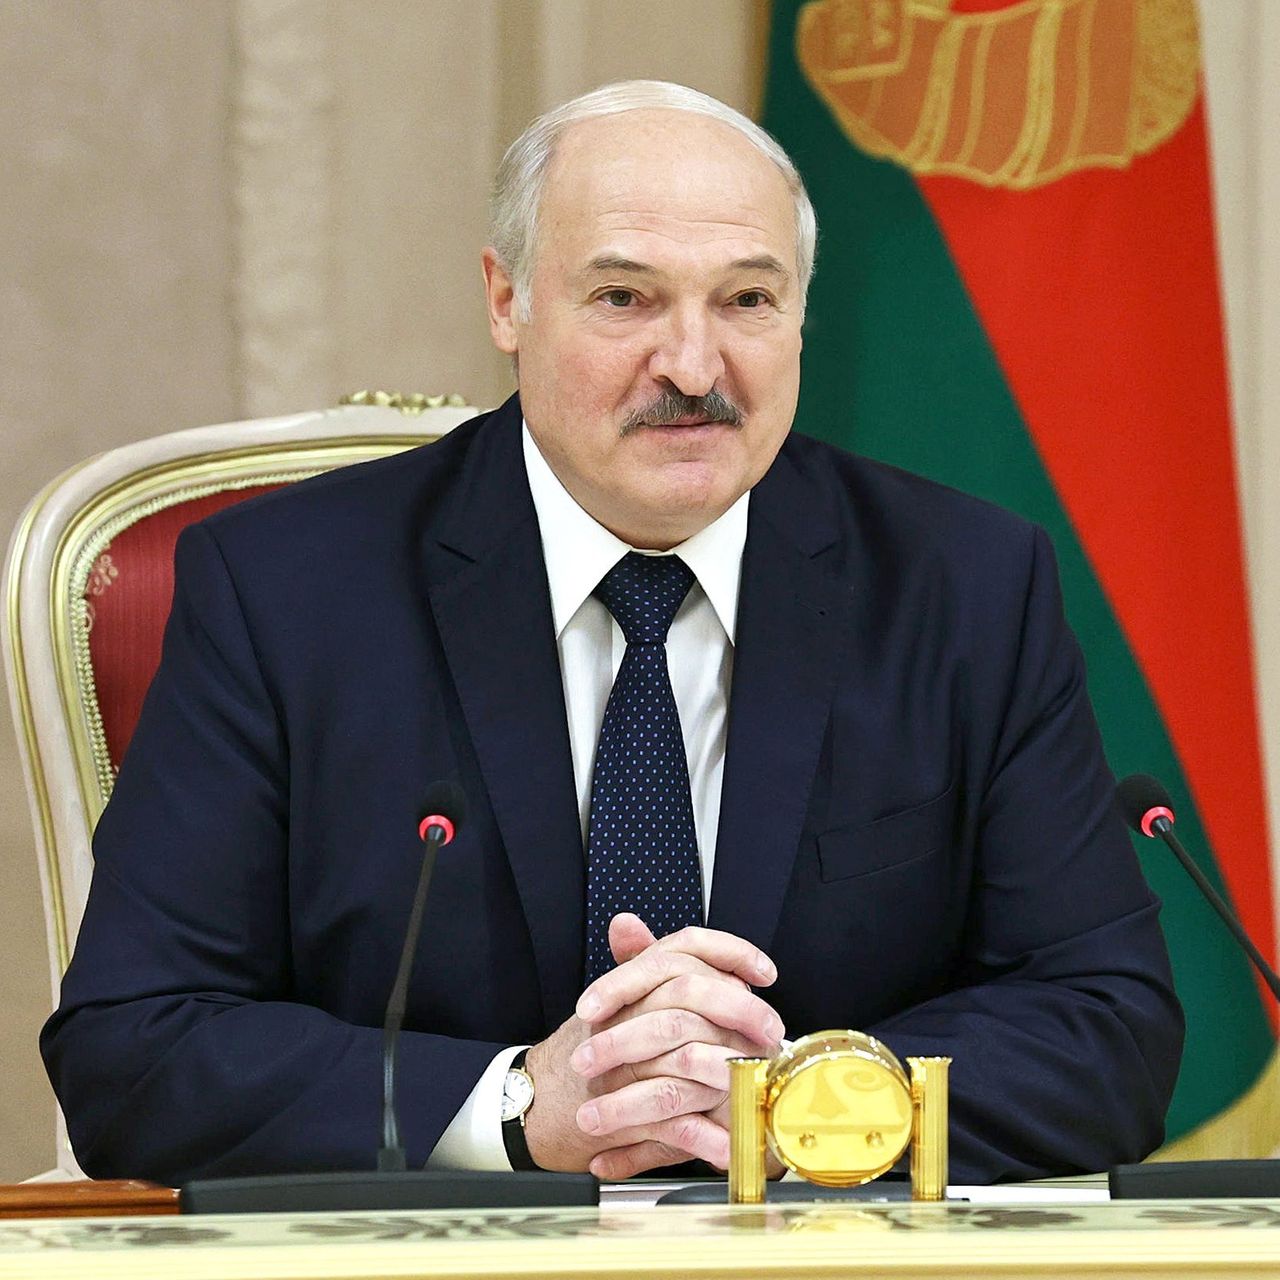 Belarusian President refuses to win Pompeo: ready to work with Russia to cope with new threats